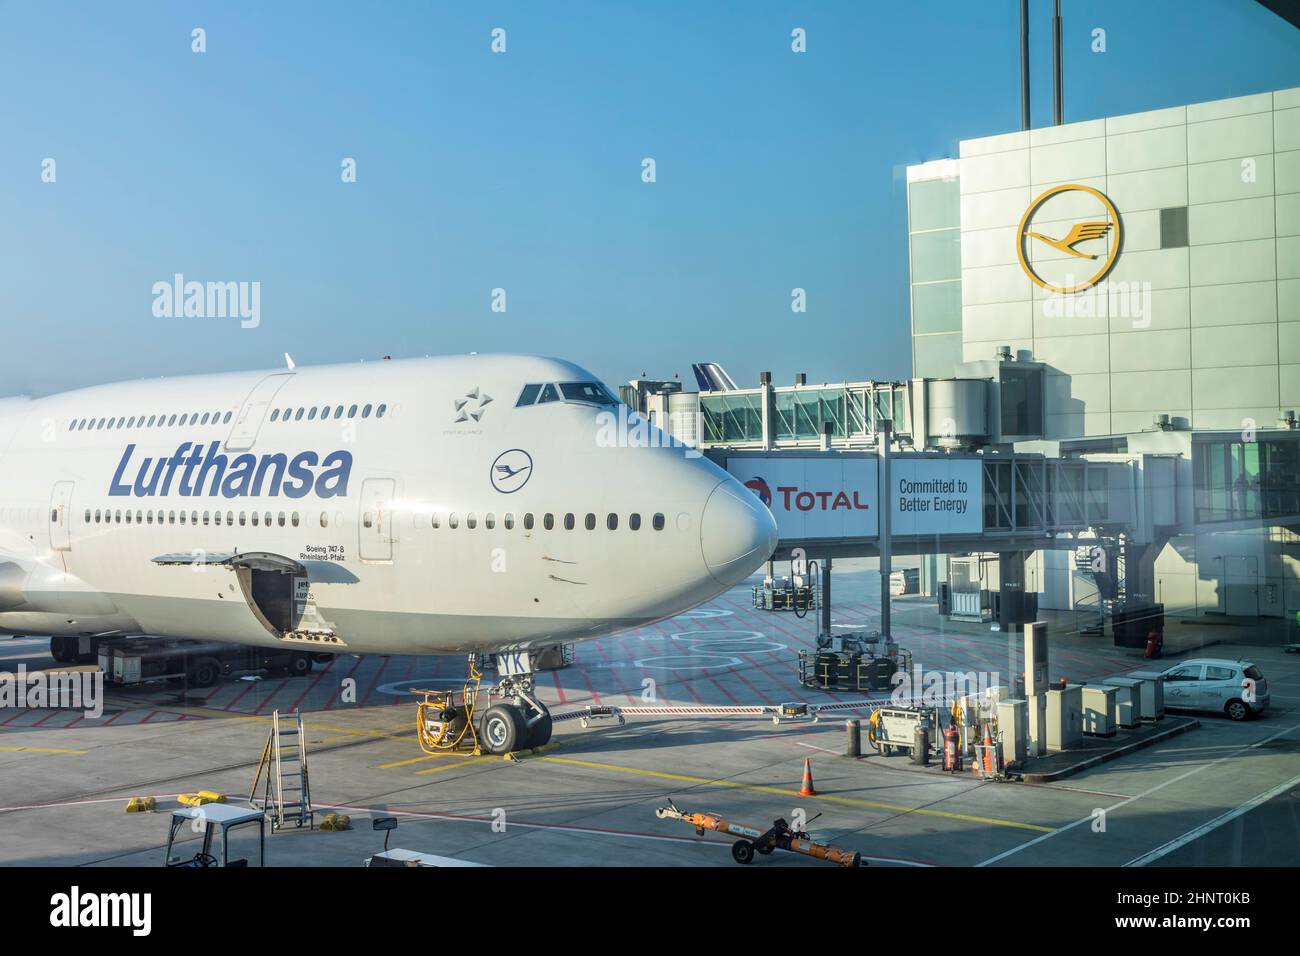 lufthansa Flight with Boeing 747 is ready for loading at Frankfurt airport Stock Photo